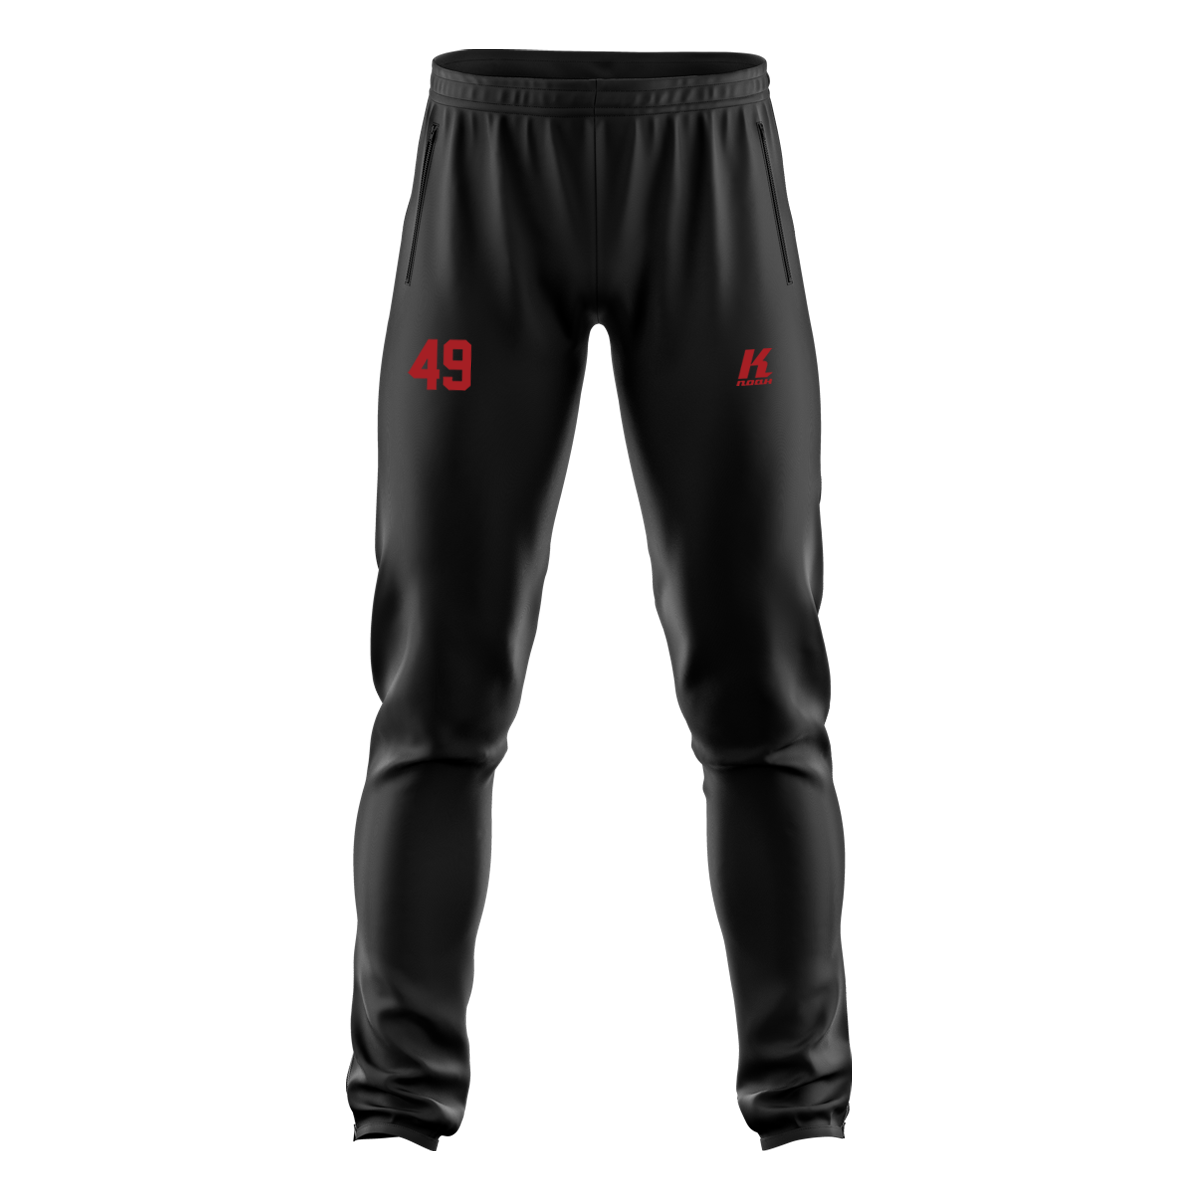 Silverbacks Leisure Pant with Playernumber/Initials